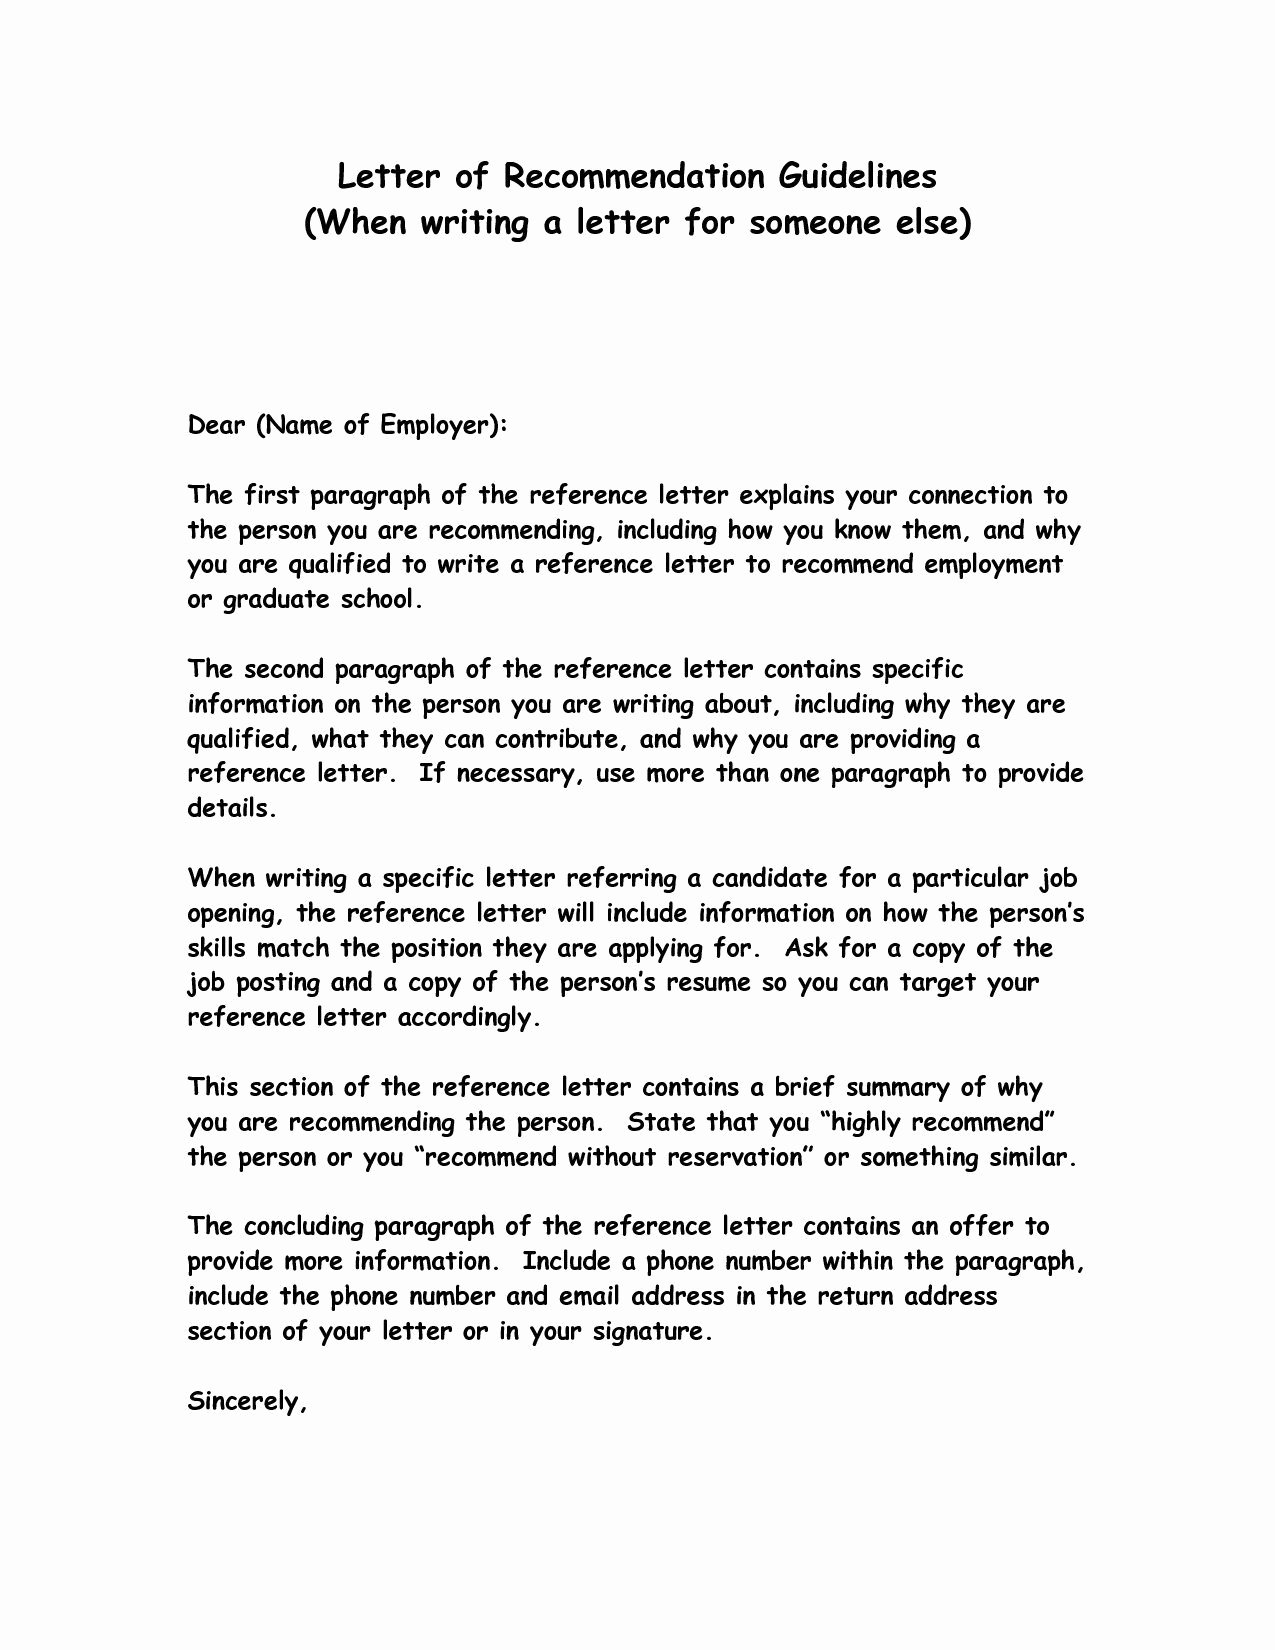 How to Write A Reference Letter Letter